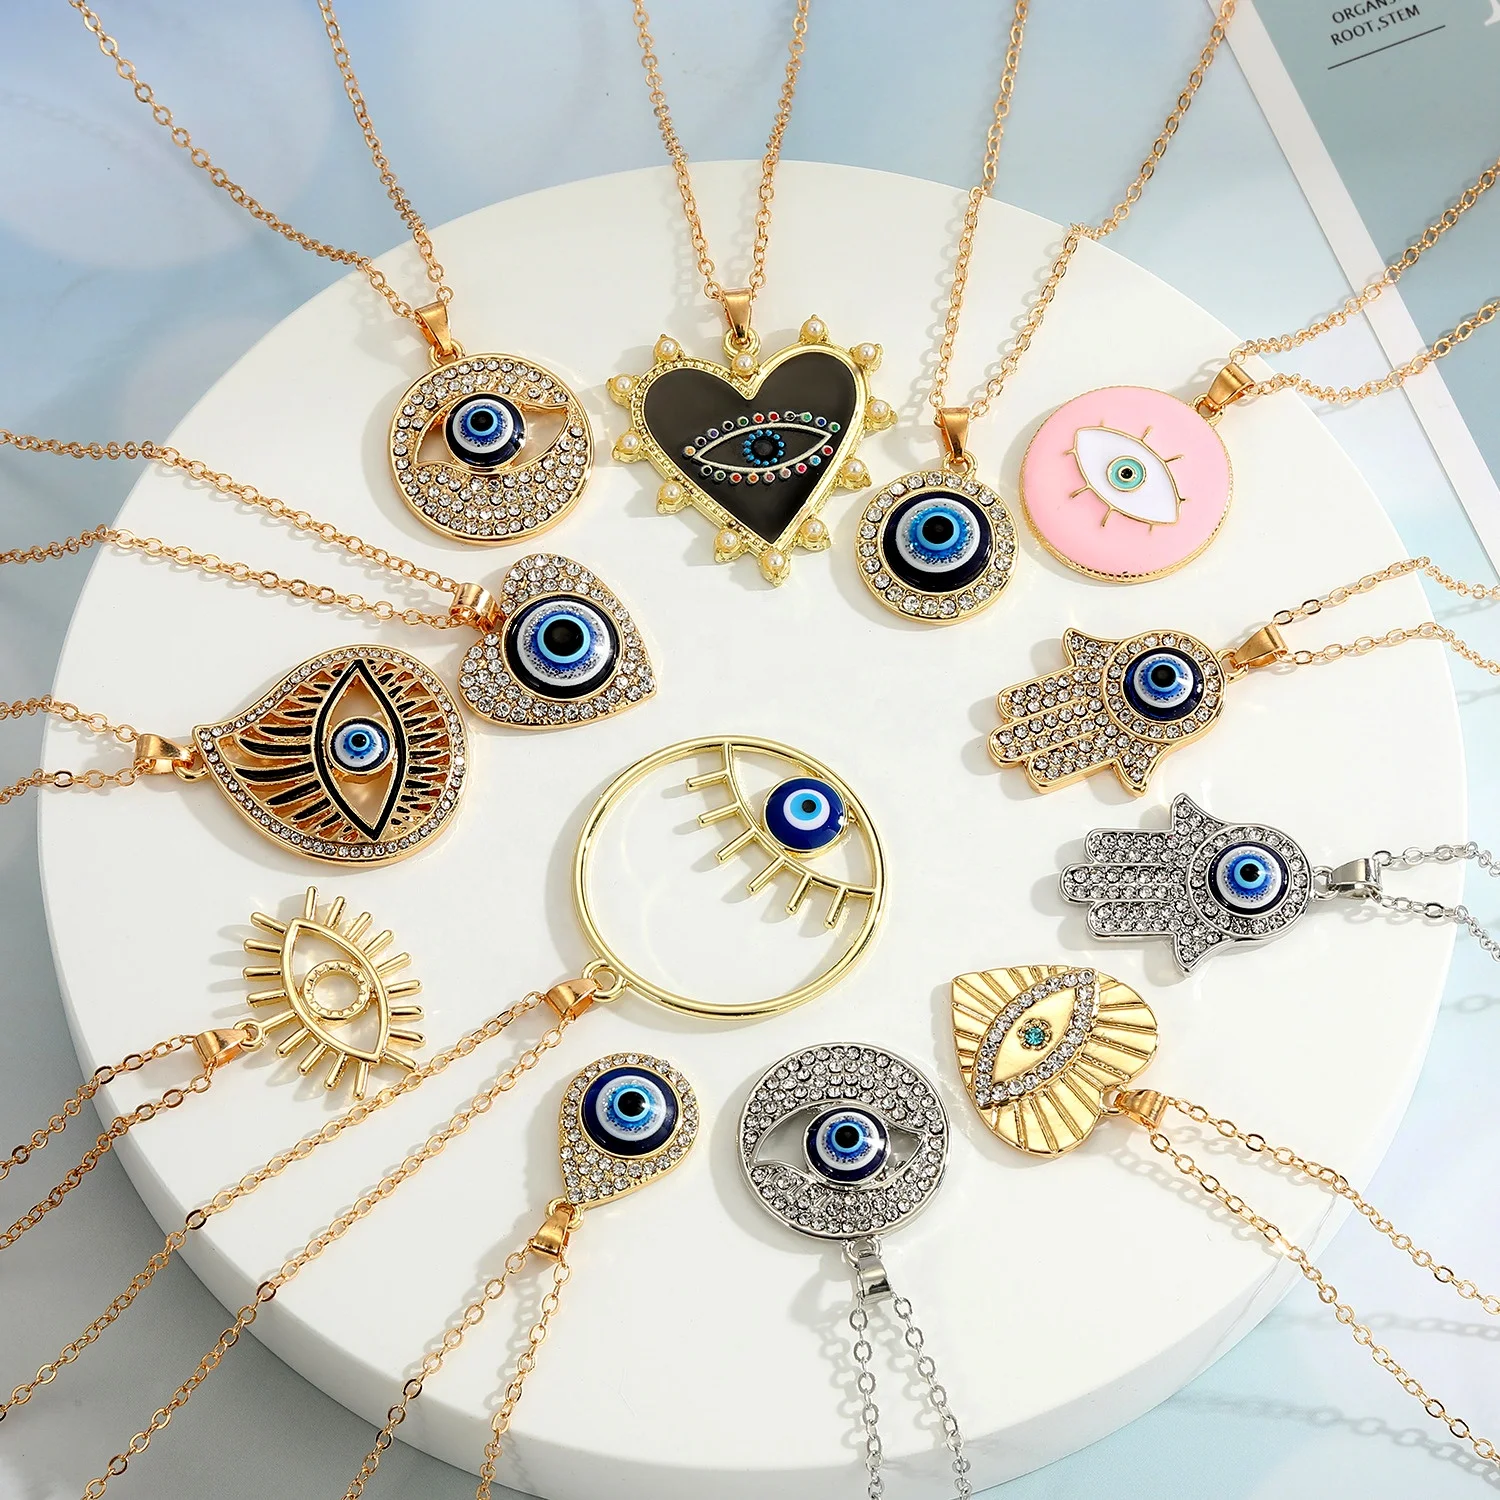 

Wholesale Bulk Gold Silver Plated Charm Heart Hasma Fatima Hands Pendant Woman Crystal Blue Turkish Evil Eye Necklace Jewelry